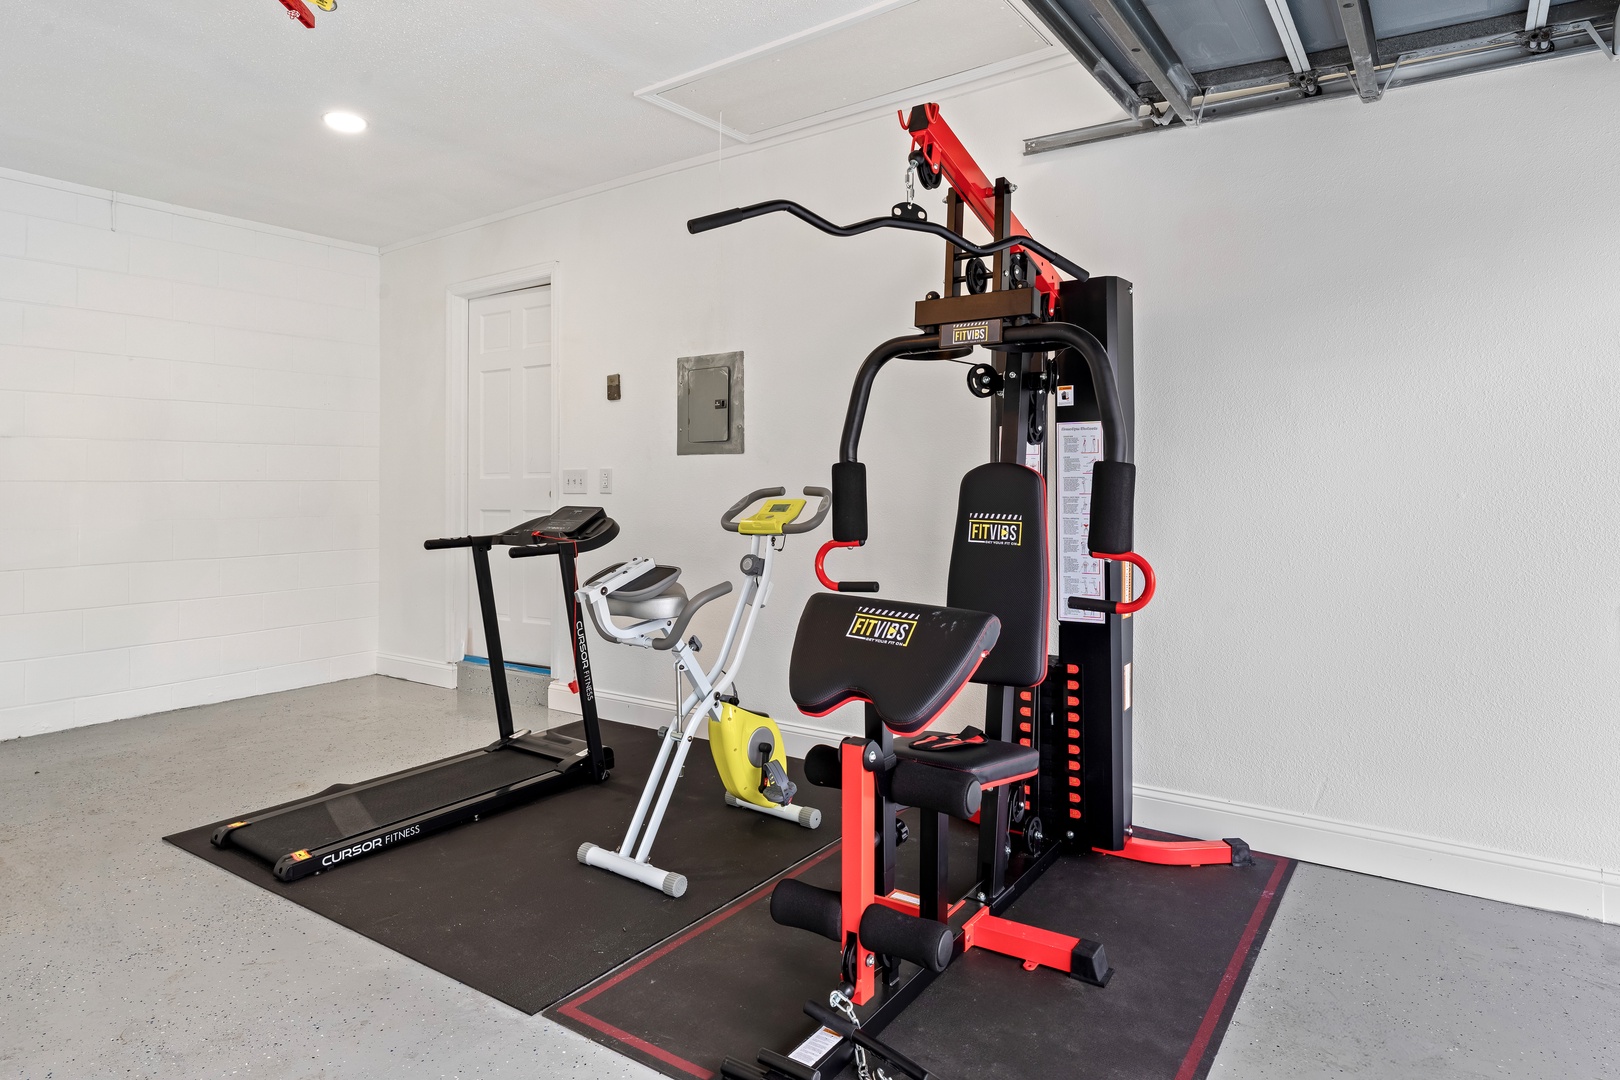 Crush your fitness goals in the garage gym